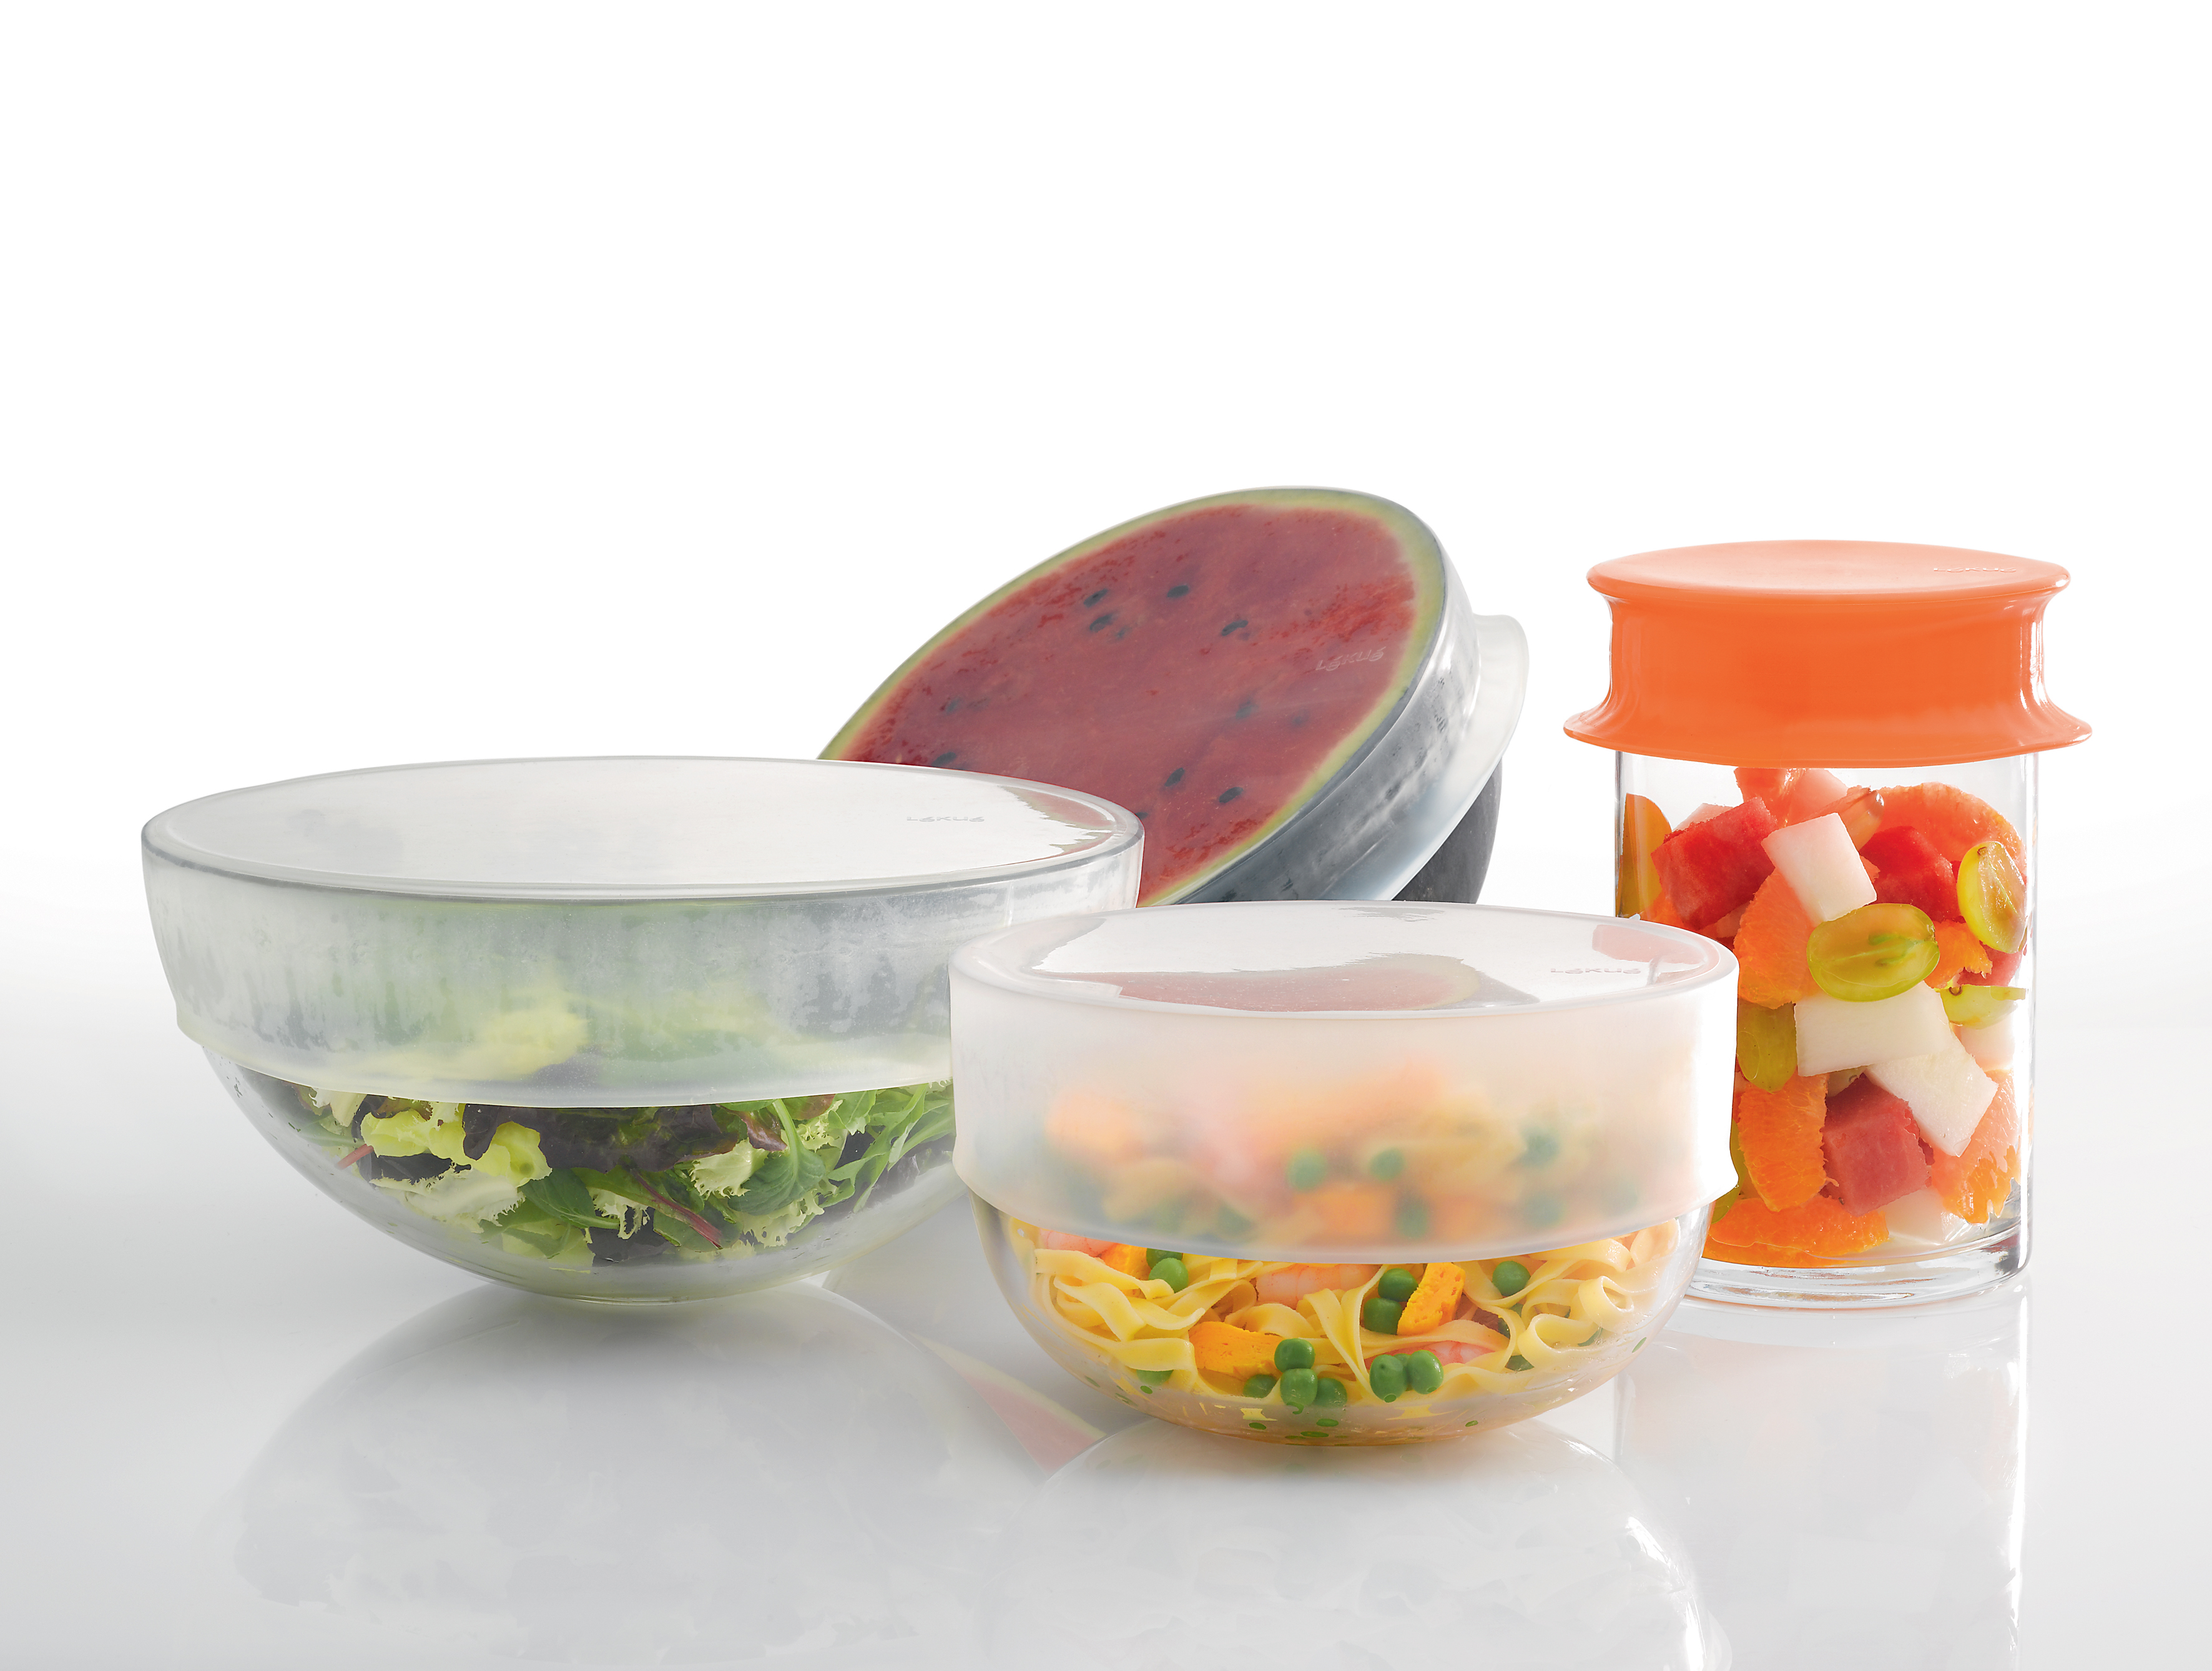 Lékué stretch top lids fit over containers of varying sizes and around foods.